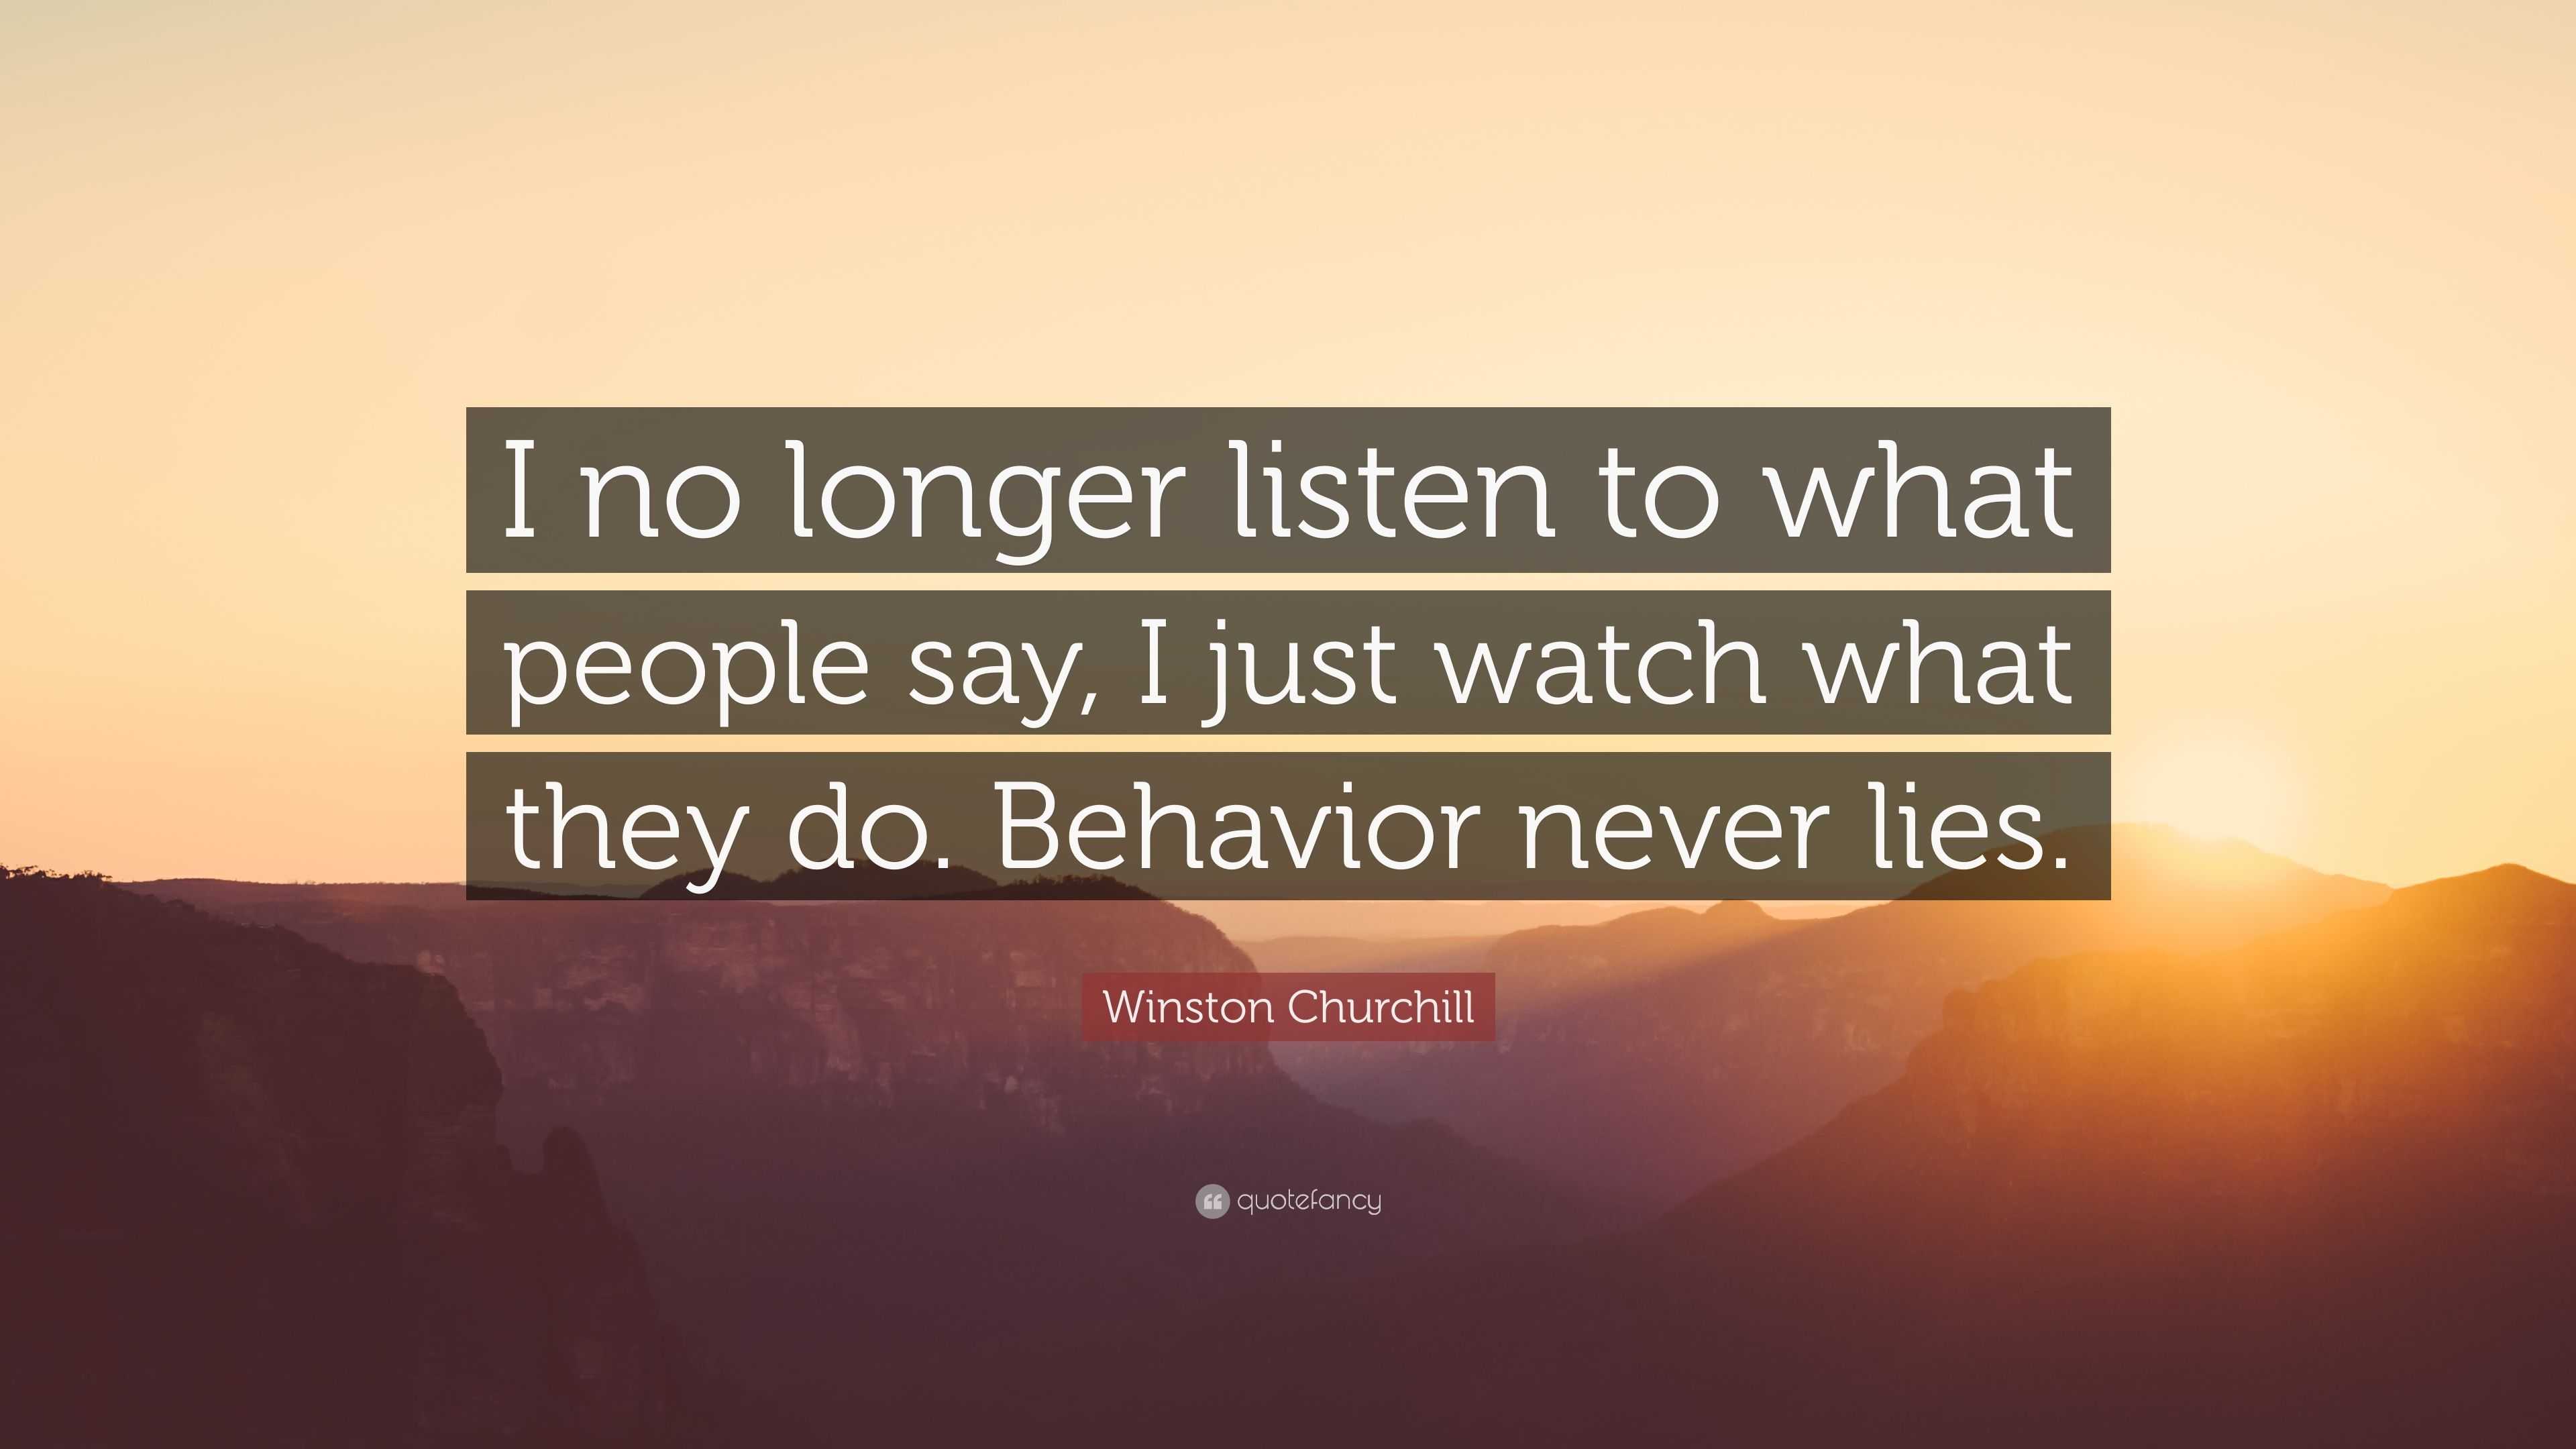 Winston Churchill Quote: “I no longer listen to what people say, I just ...